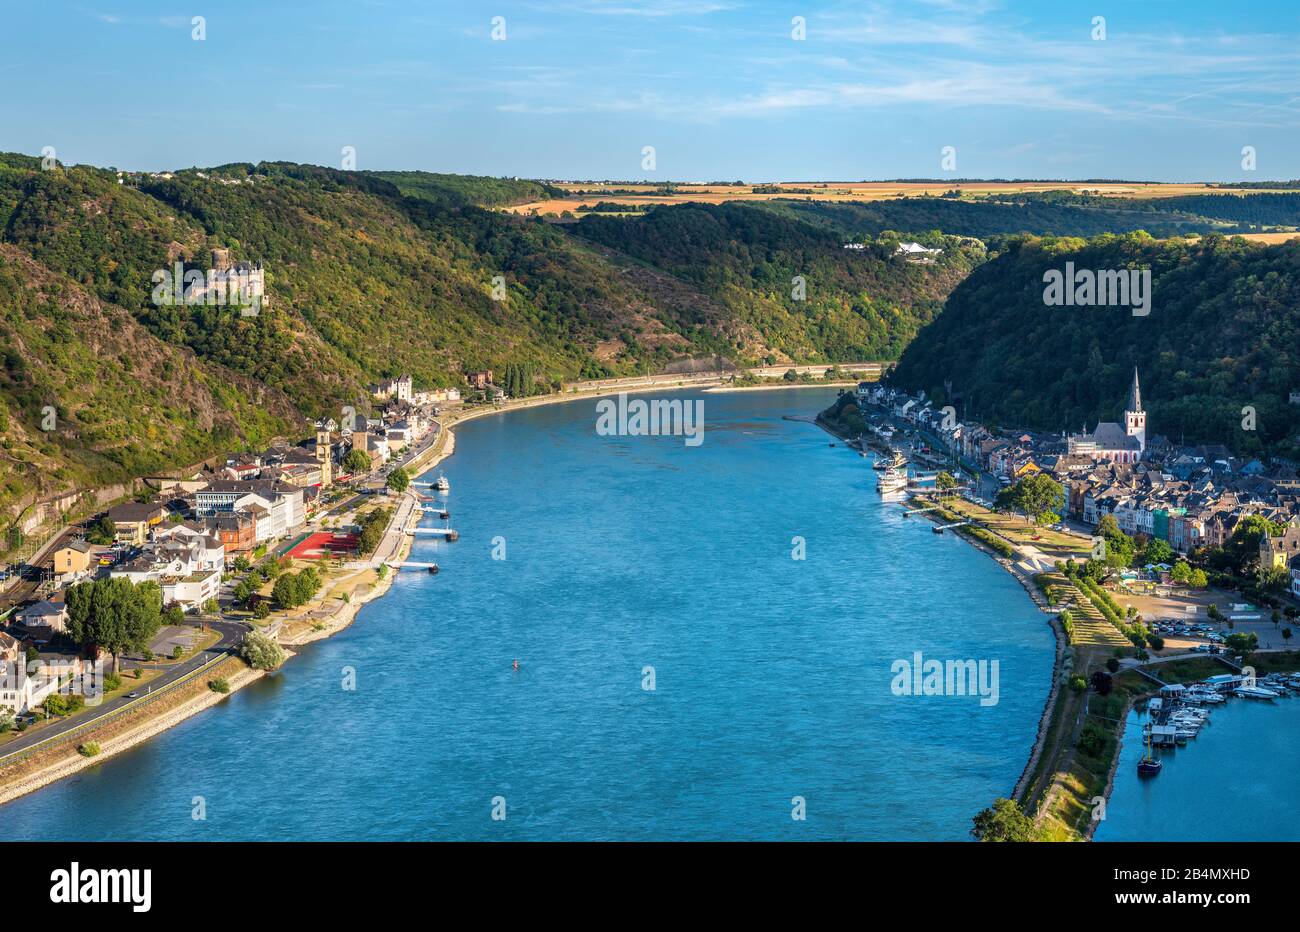 Germany, Rhineland-Palatinate, world heritage cultural landscape Upper Middle Rhine Valley, view of the Rhine, left St. Goarshausen with Burg Katz, right St. Goar, Stock Photo